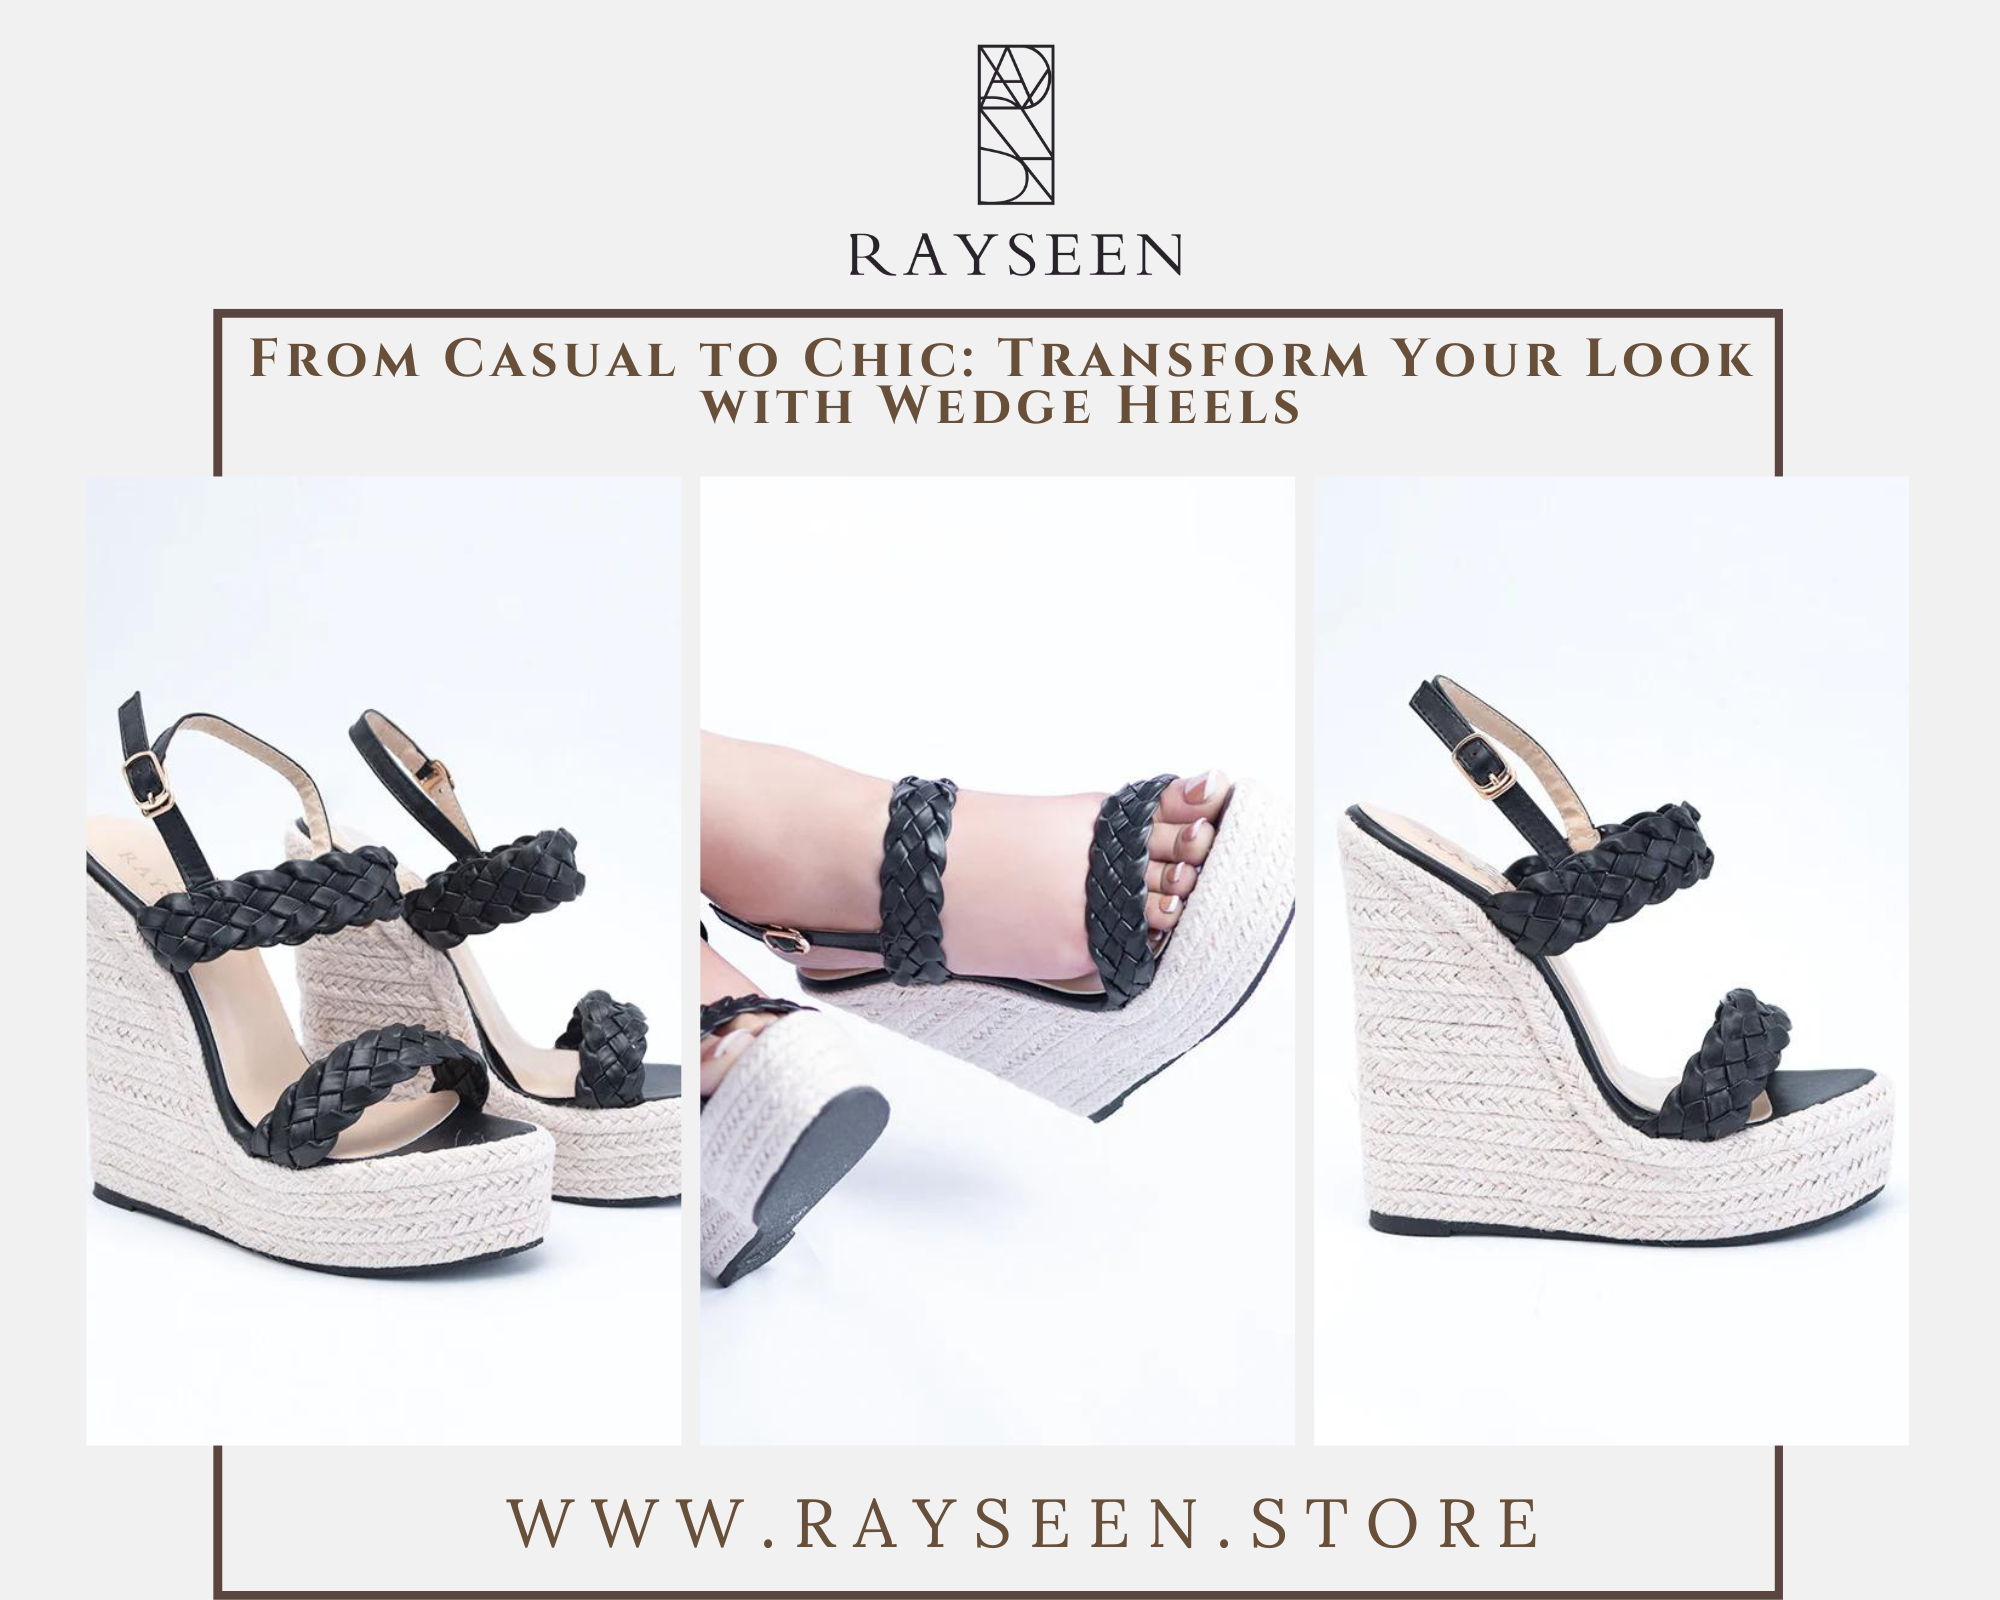 From Casual to Chic Transform Your Look with Wedge Heels